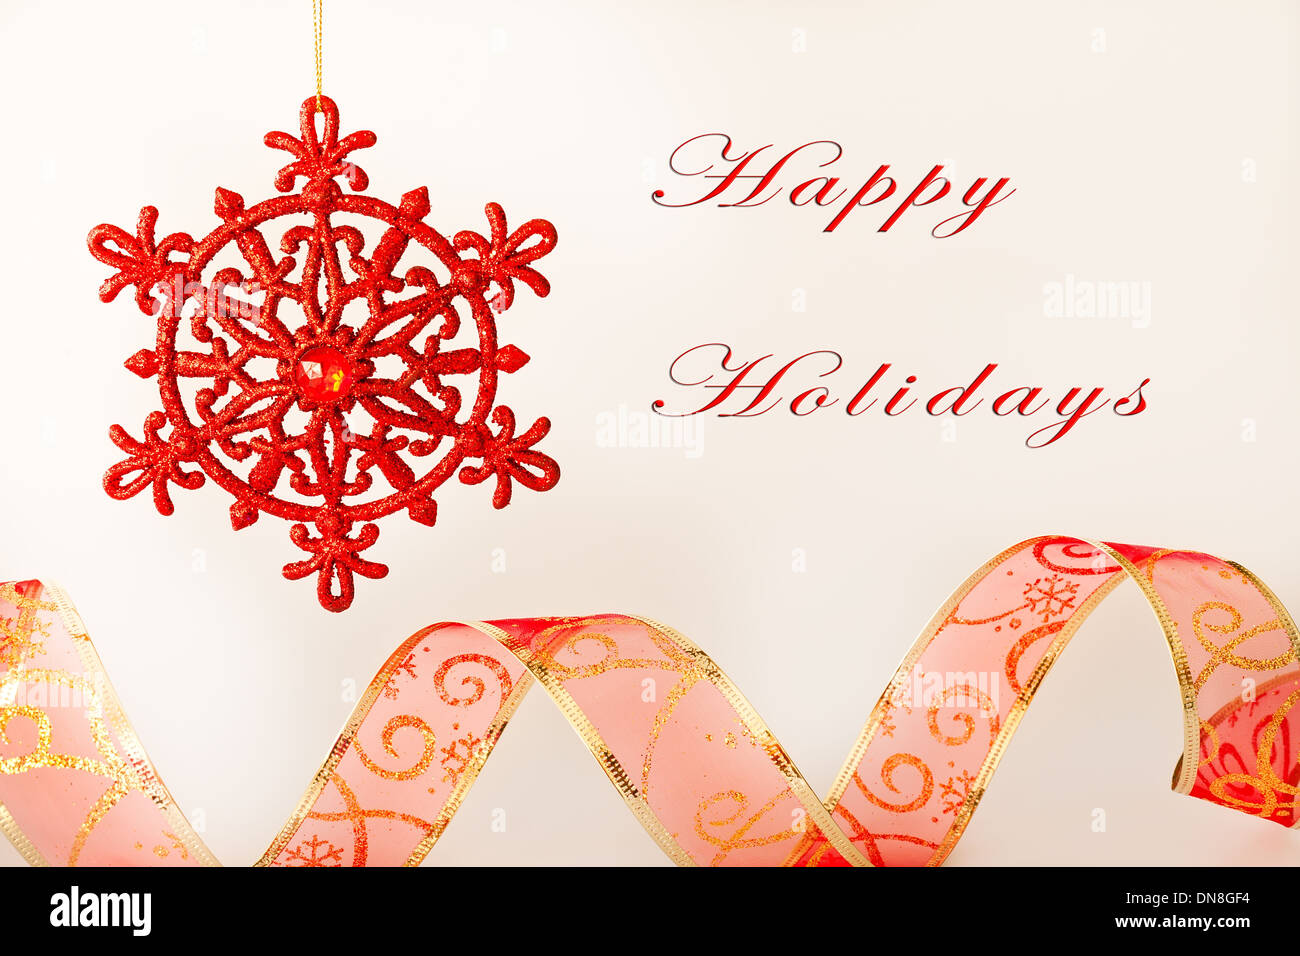 Happy Holidays card with text, ribbon and ornament Stock Photo